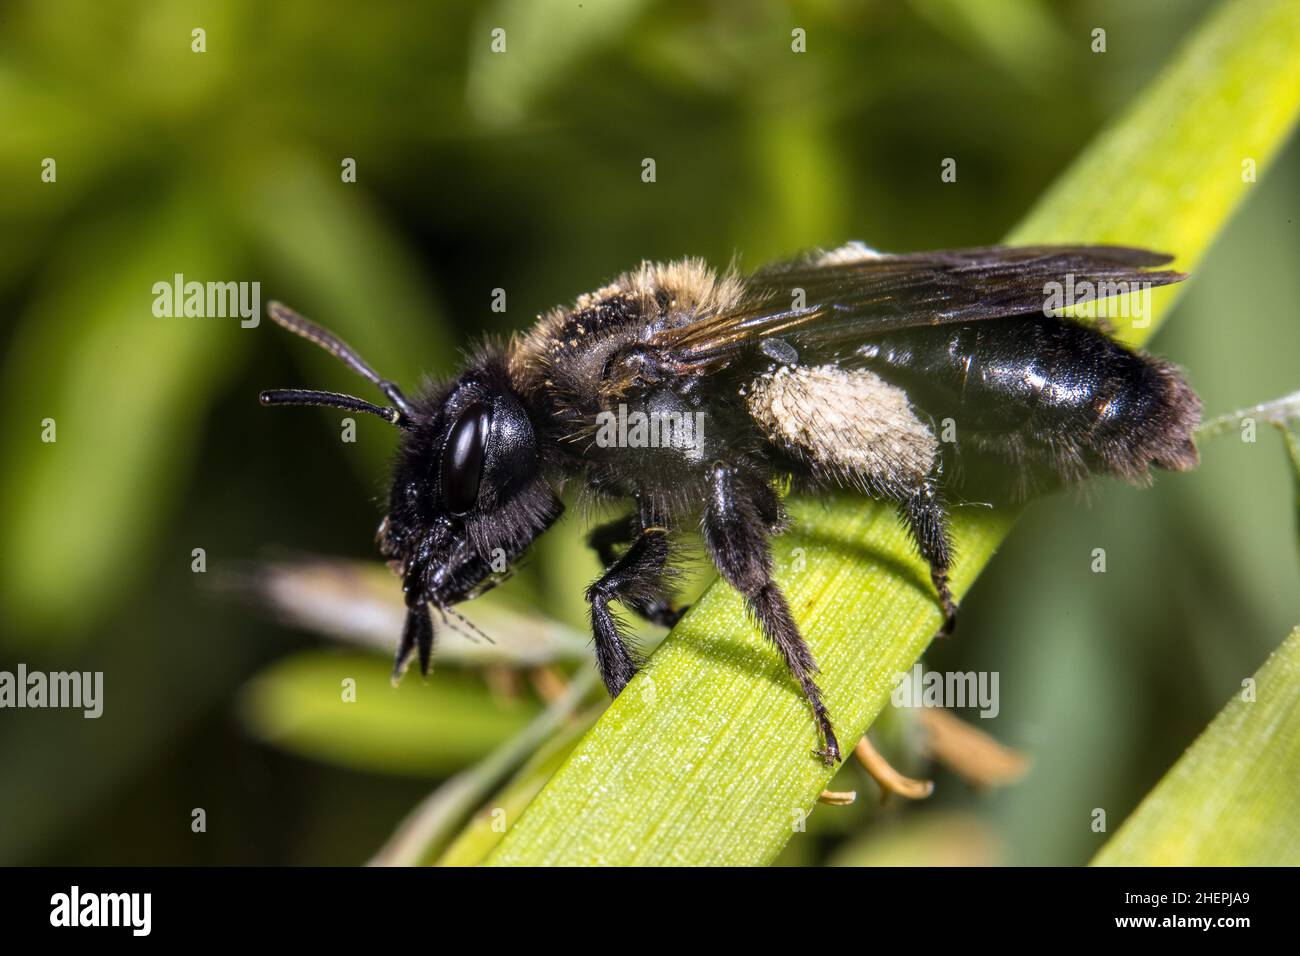 mining bee (Andrena nasuta), sitting on a blade of grass, side view, Germany Stock Photo